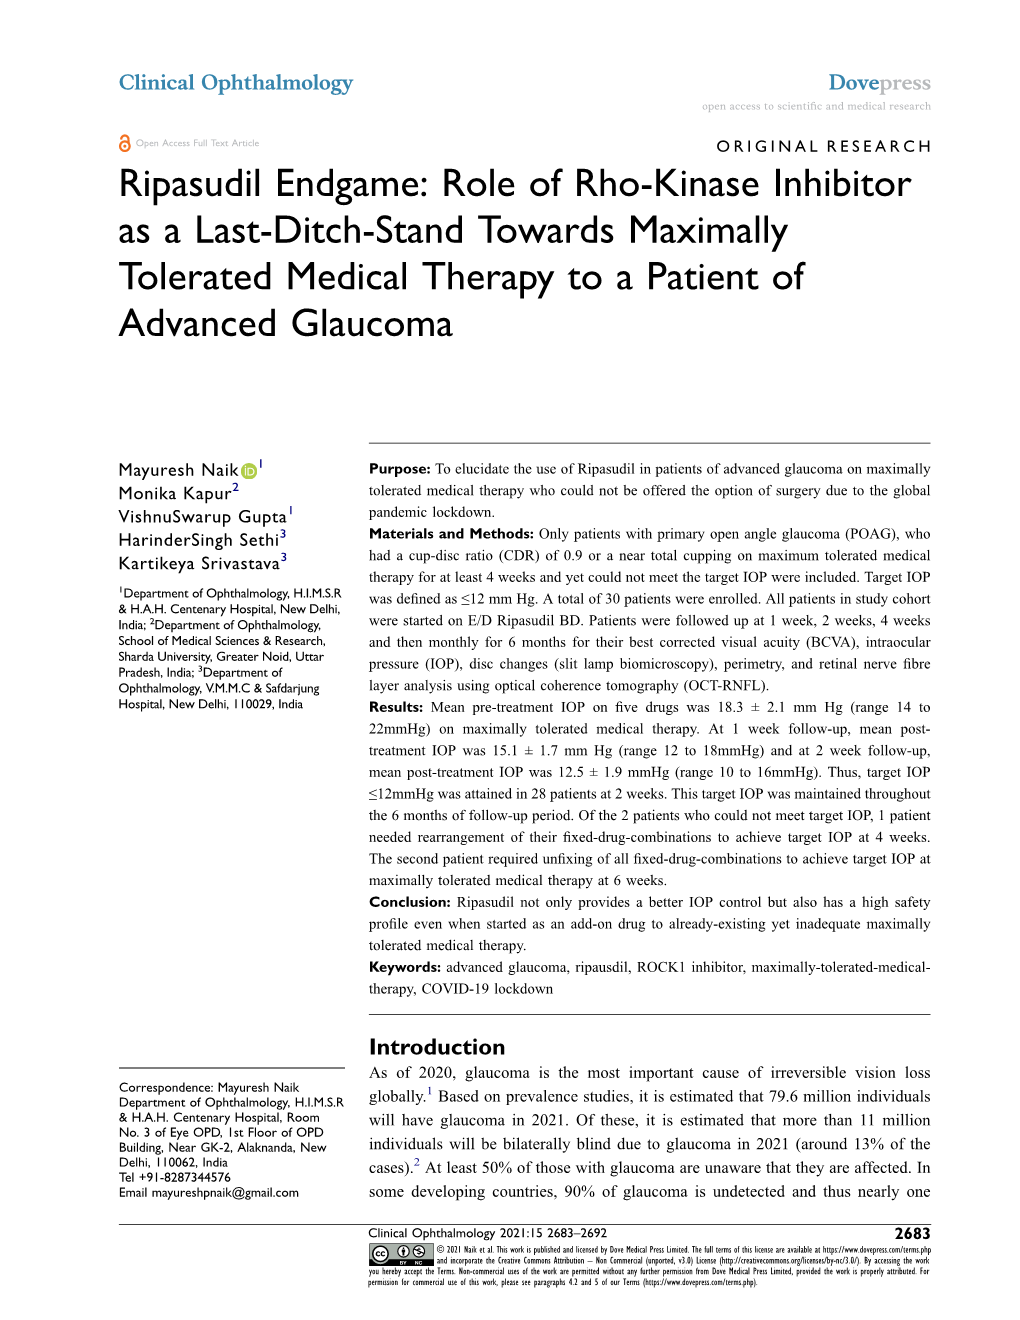 Ripasudil Endgame: Role of Rho-Kinase Inhibitor As a Last-Ditch-Stand Towards Maximally Tolerated Medical Therapy to a Patient of Advanced Glaucoma